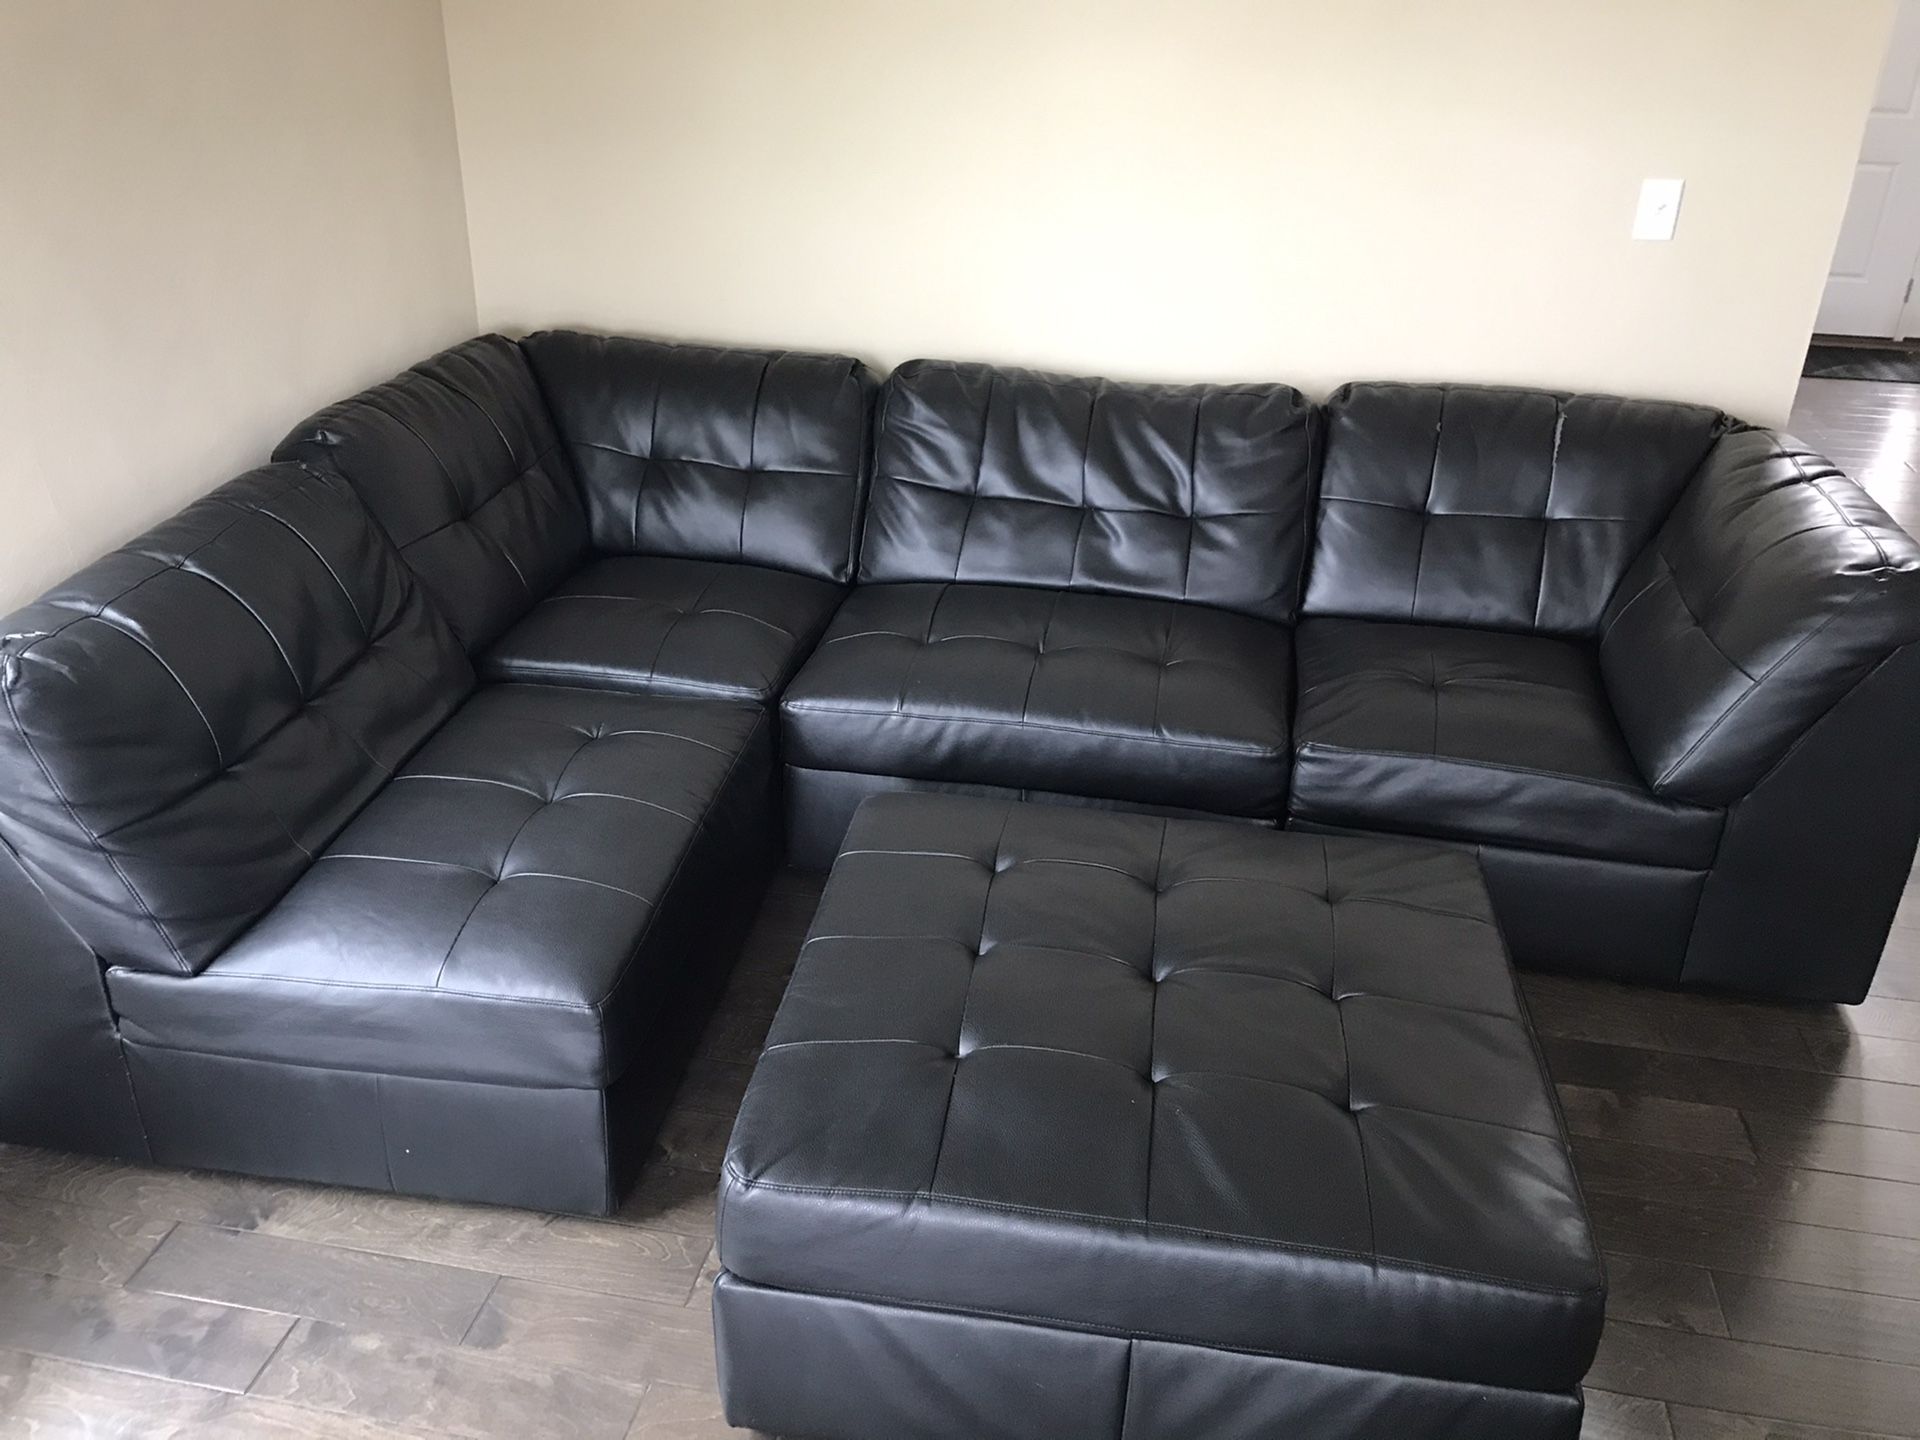 5 piece sectional black leather couch